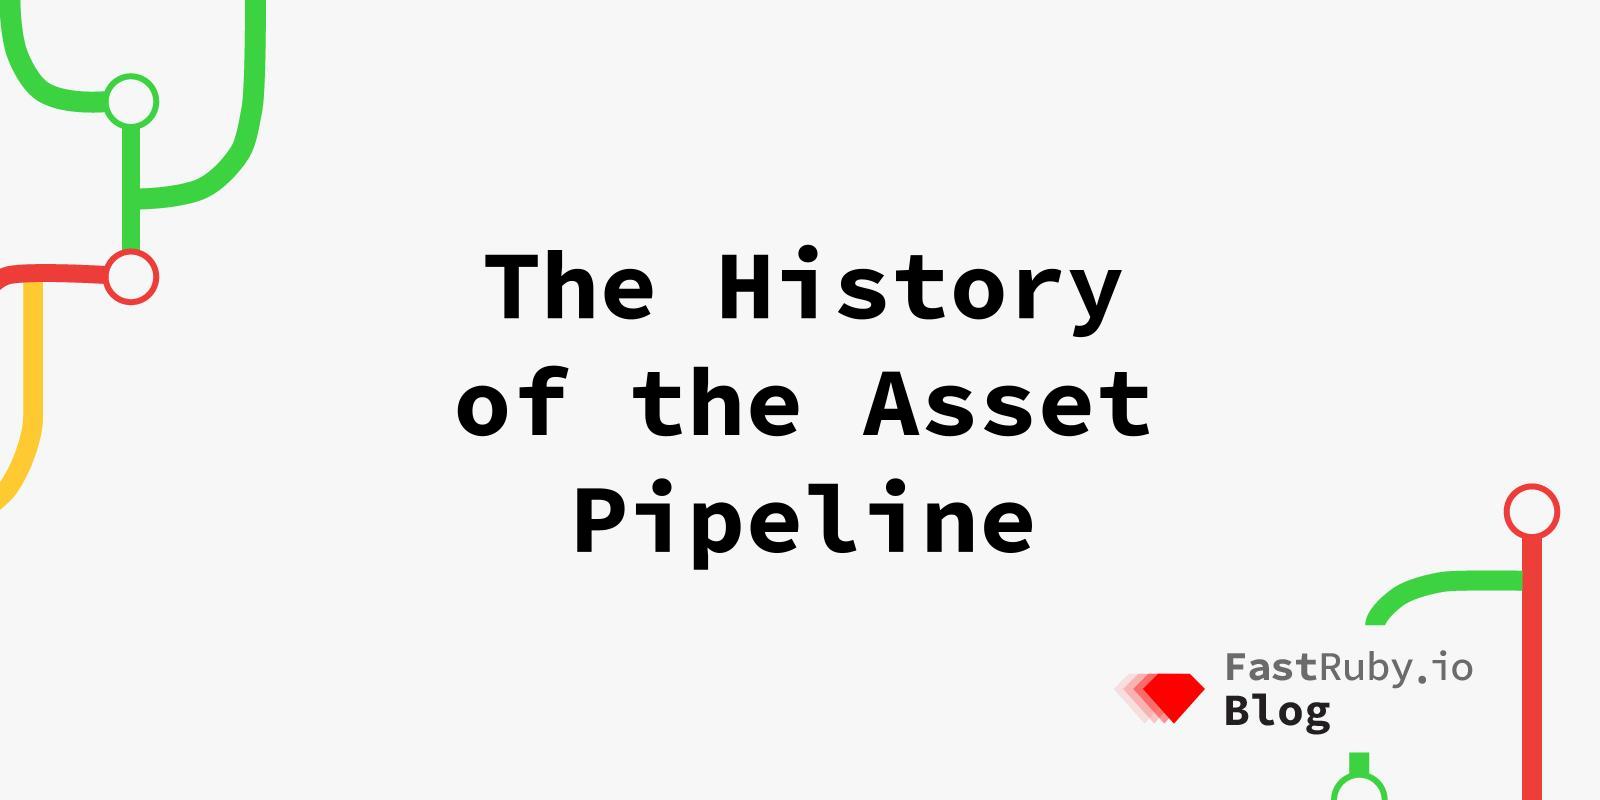 The History of the Asset Pipeline